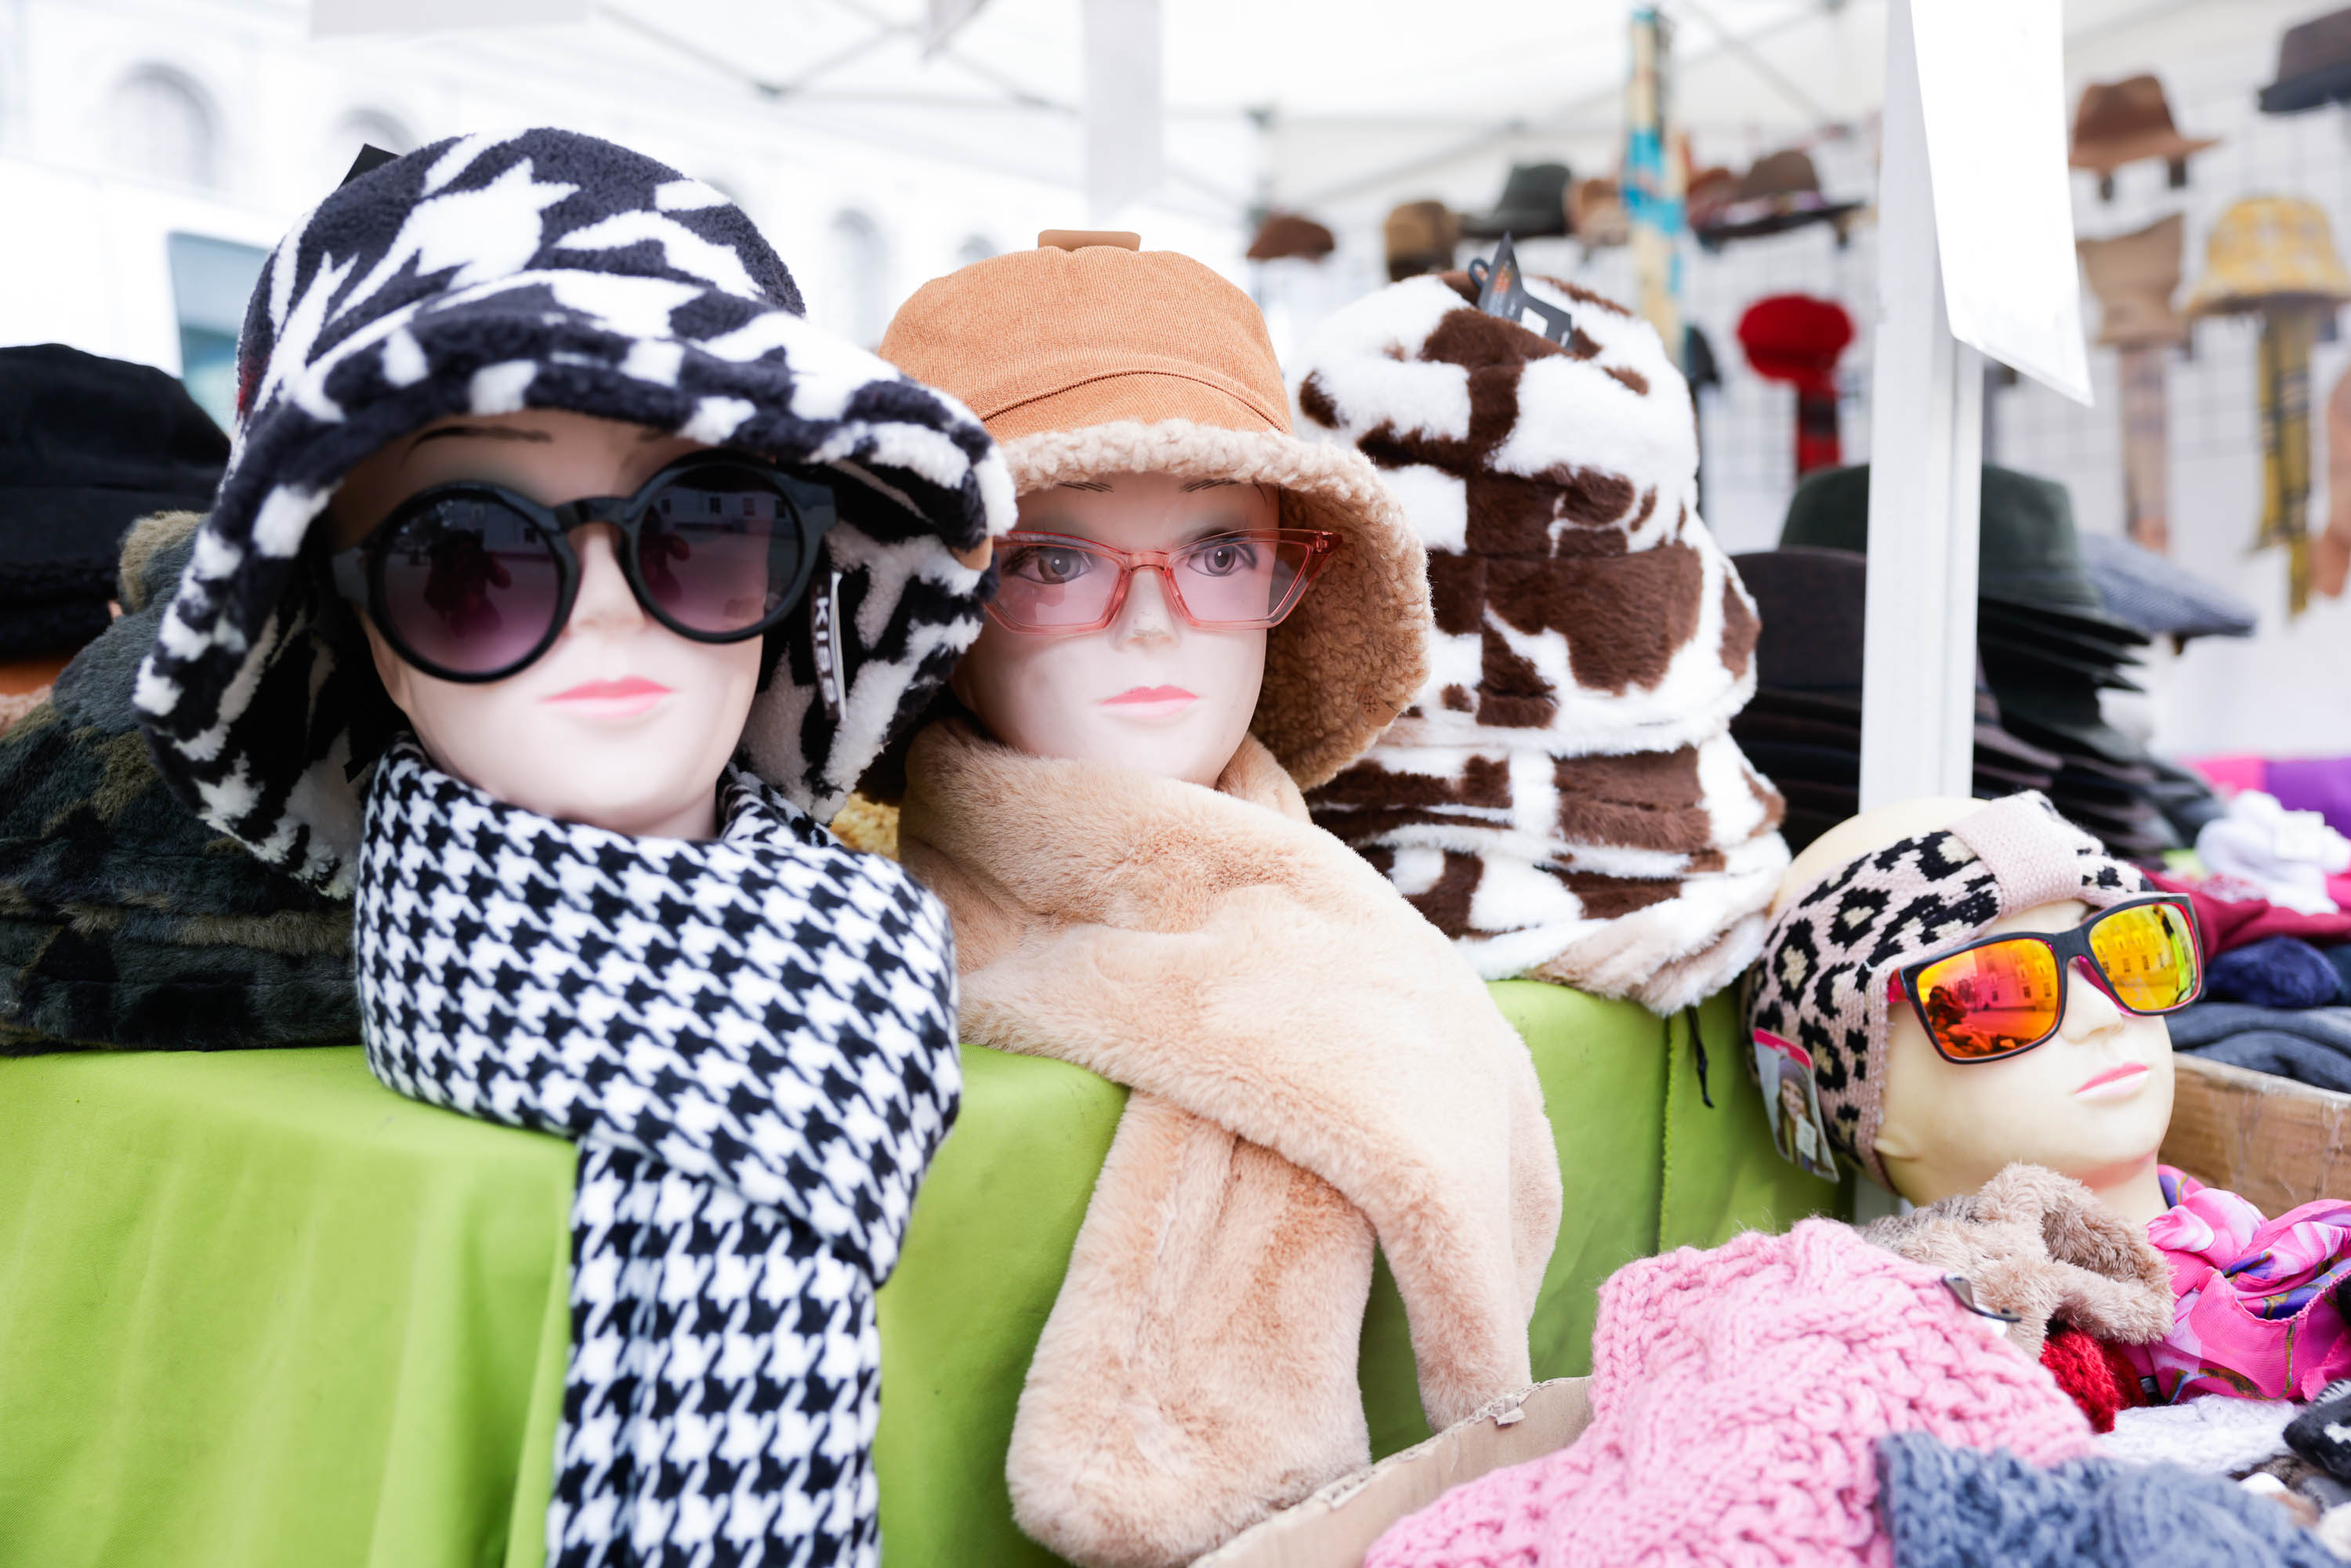 dummies sport womens hats, sunglasses and scarves on a merchandise table